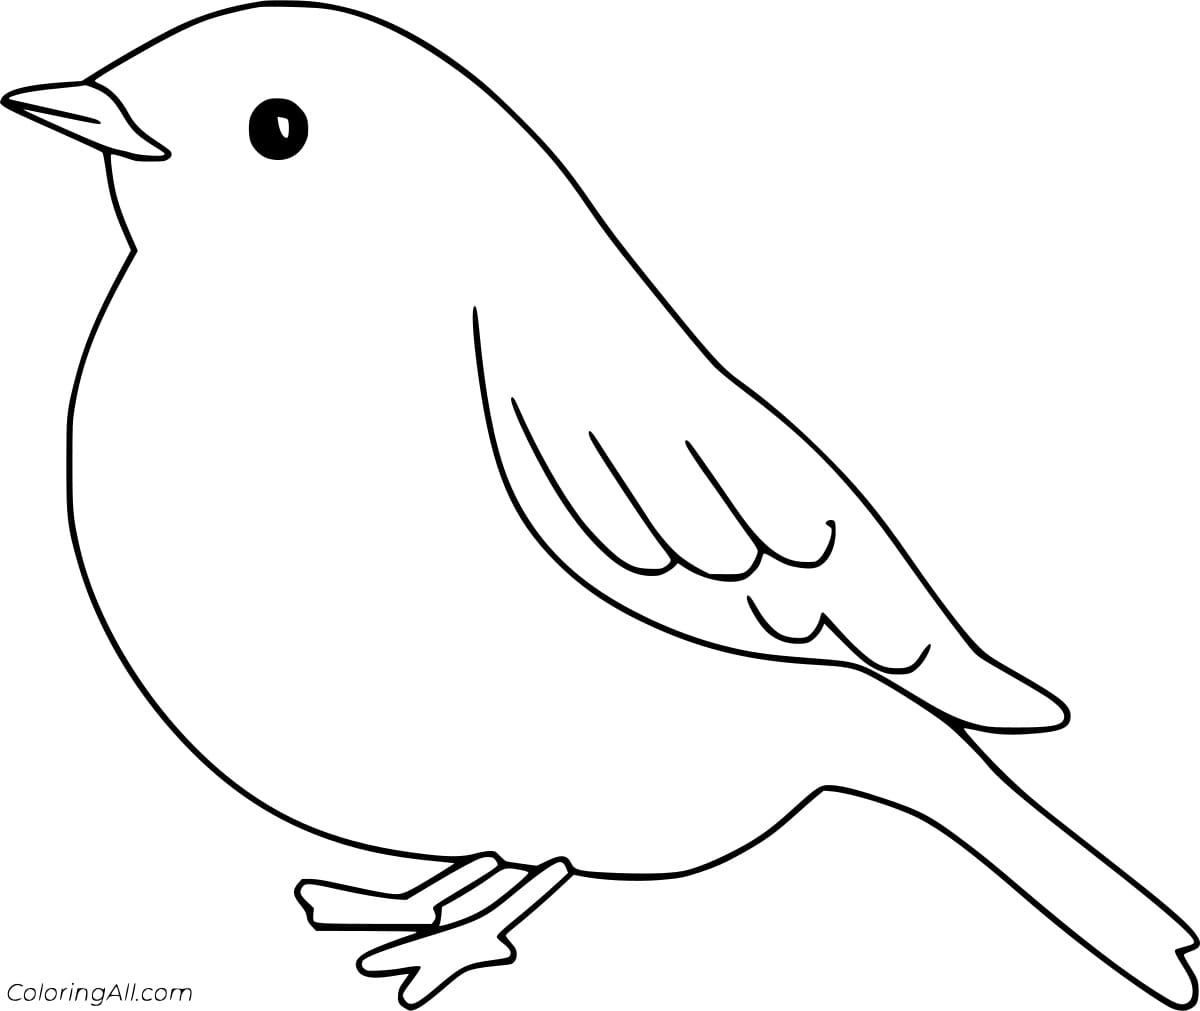 Easy Robin Image Coloring Page